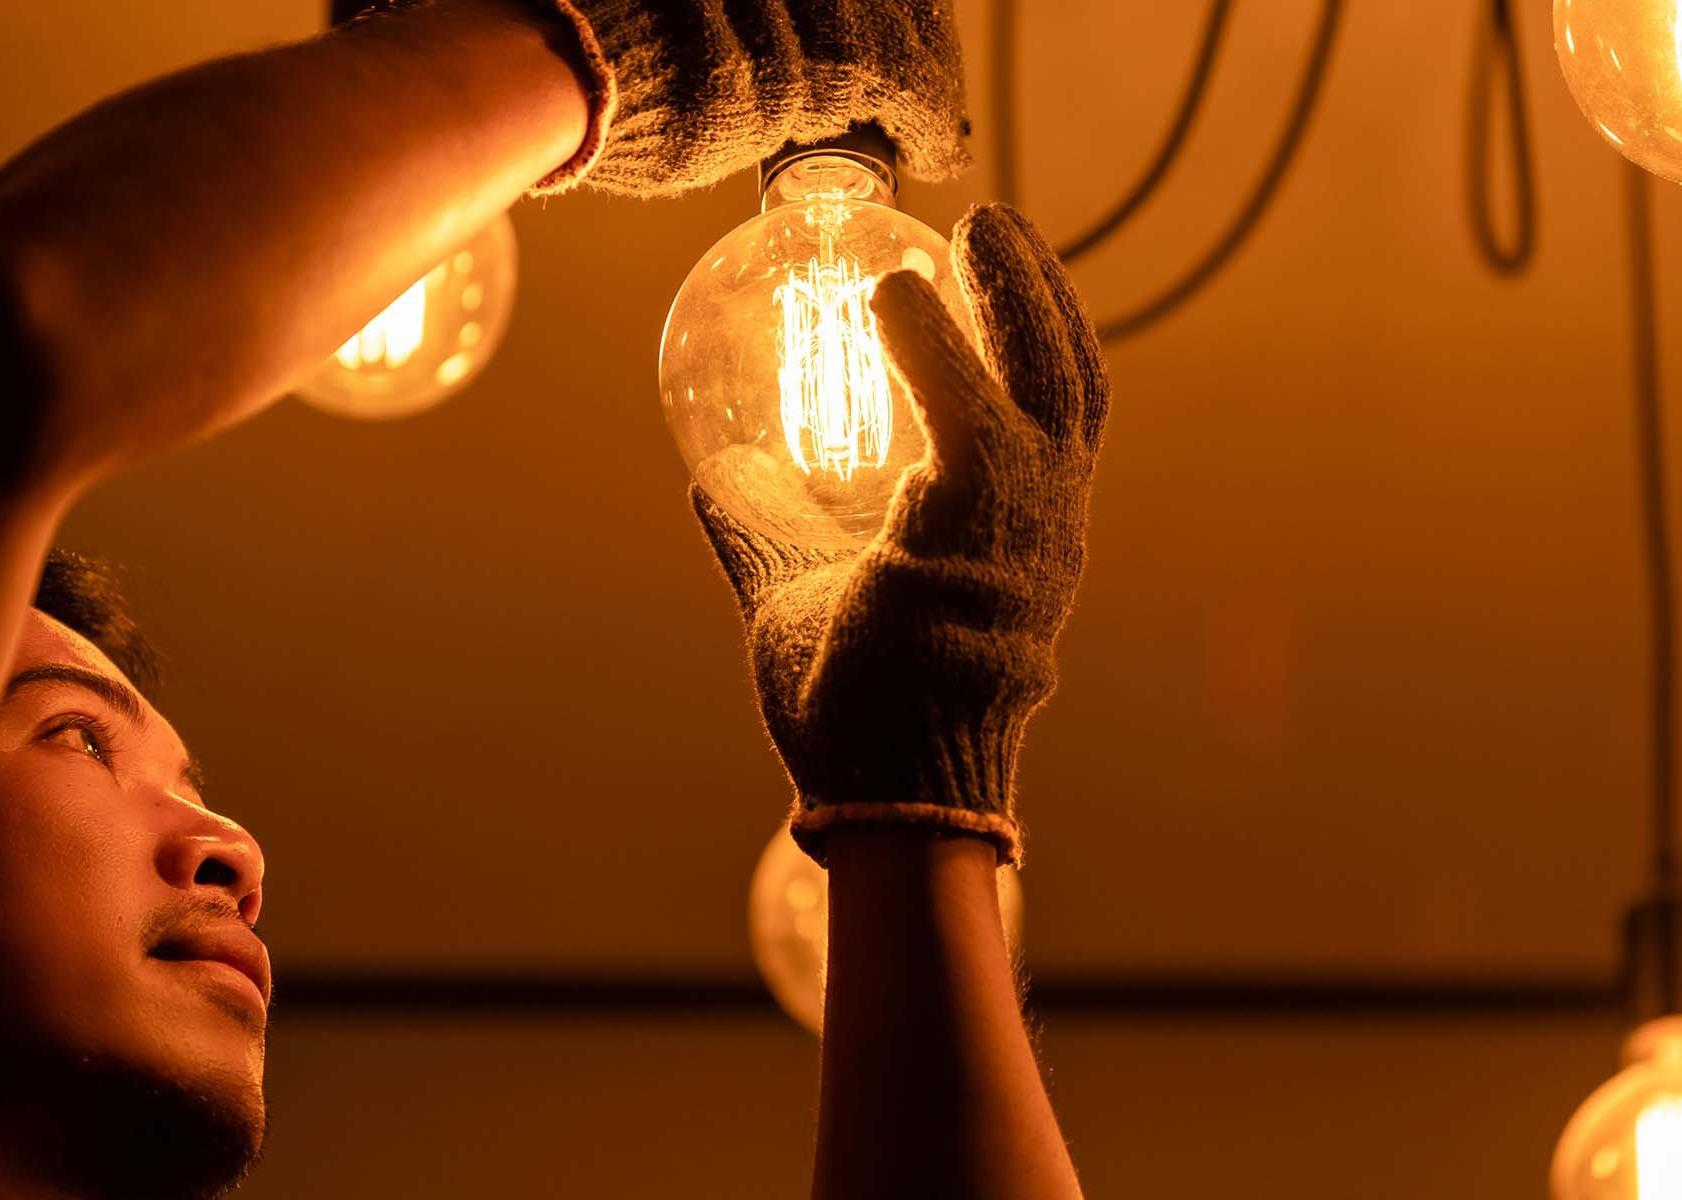 A person in gloves changing a glowing light bulb